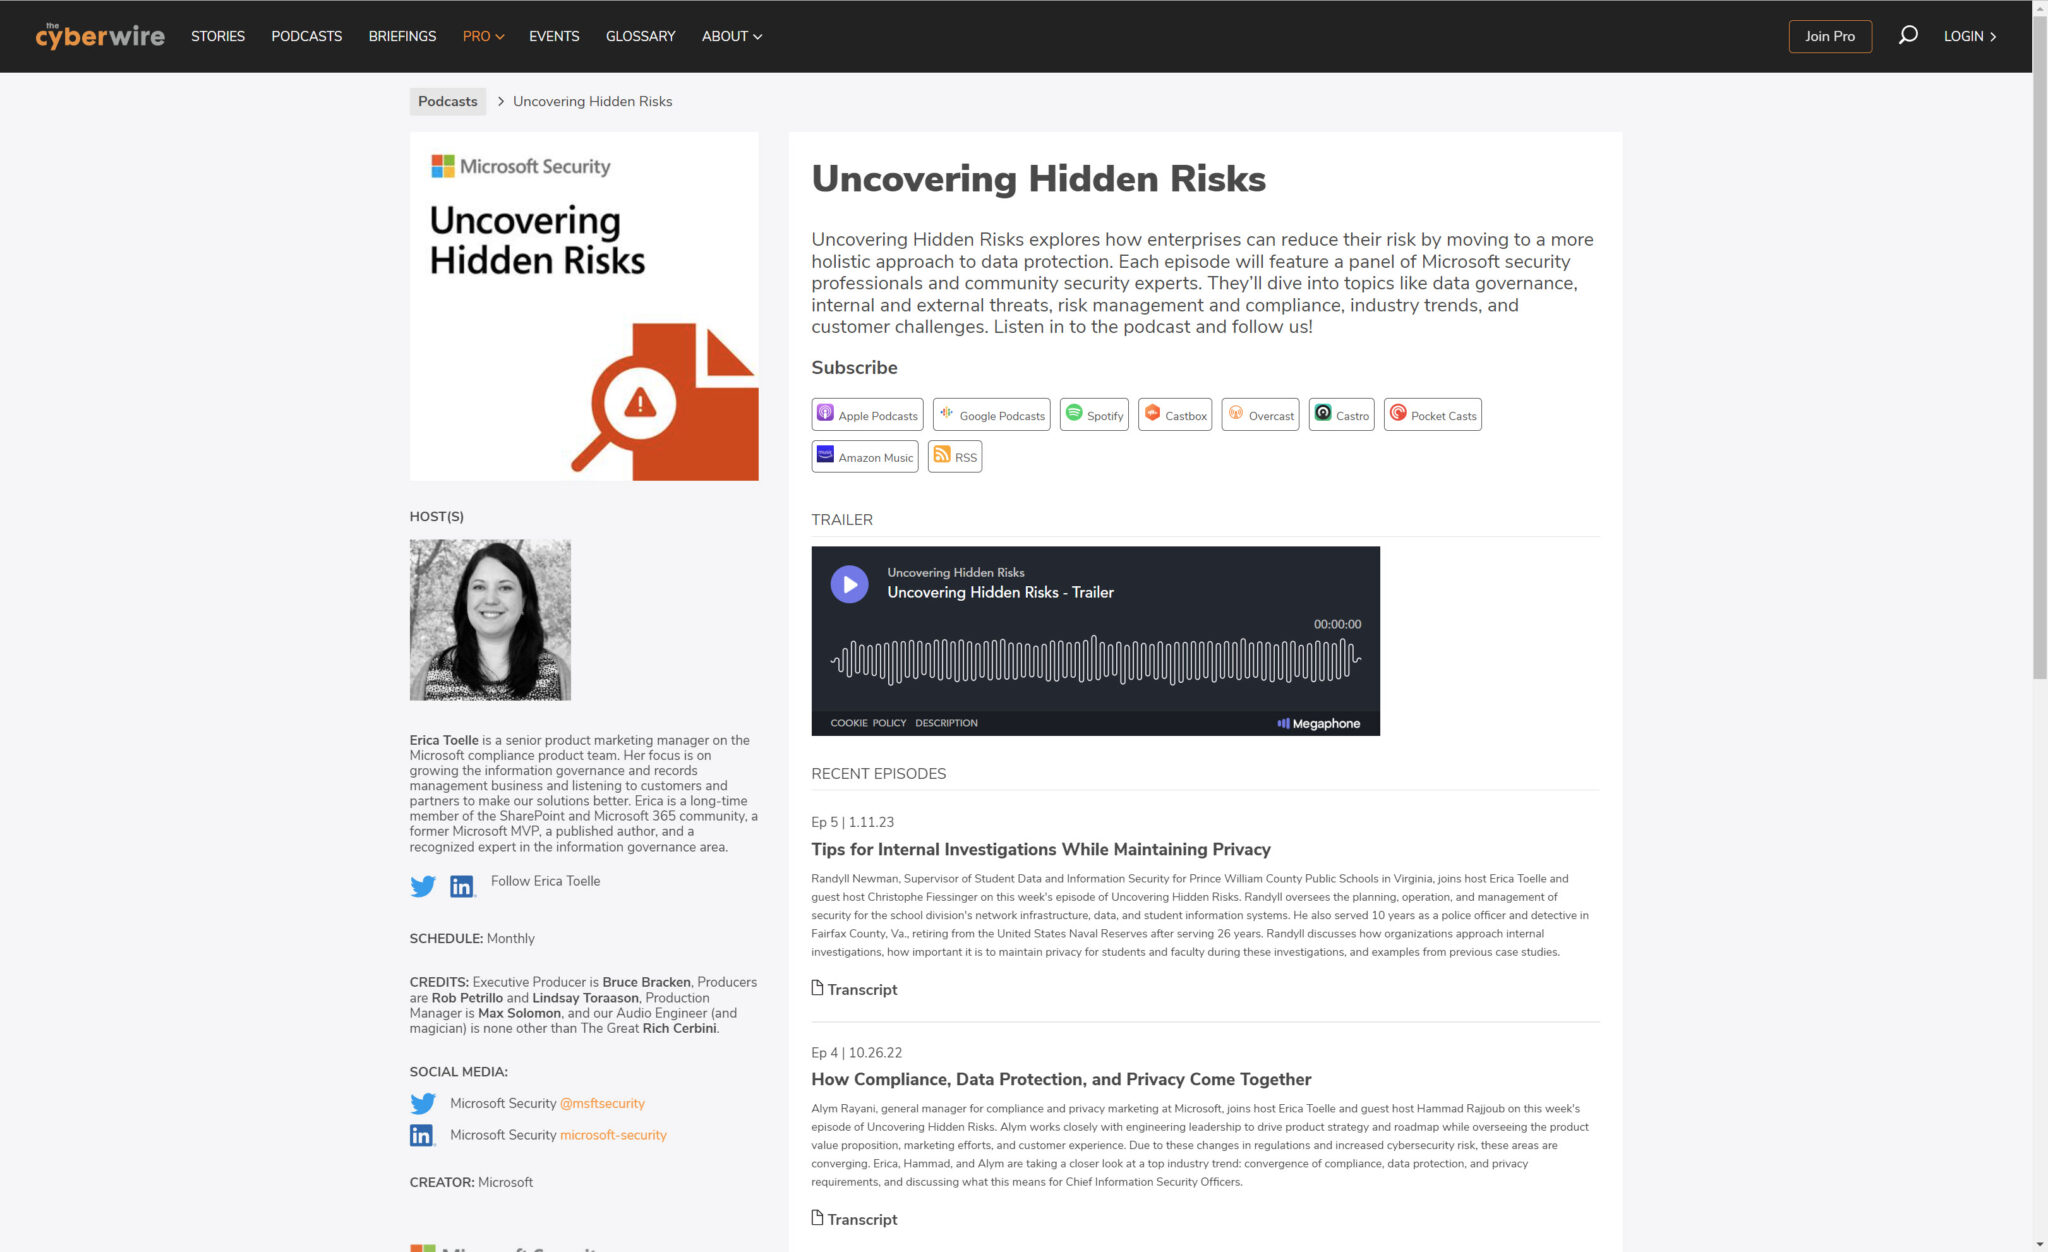 Microsoft Relaunches Uncovering Hidden Risks Podcast